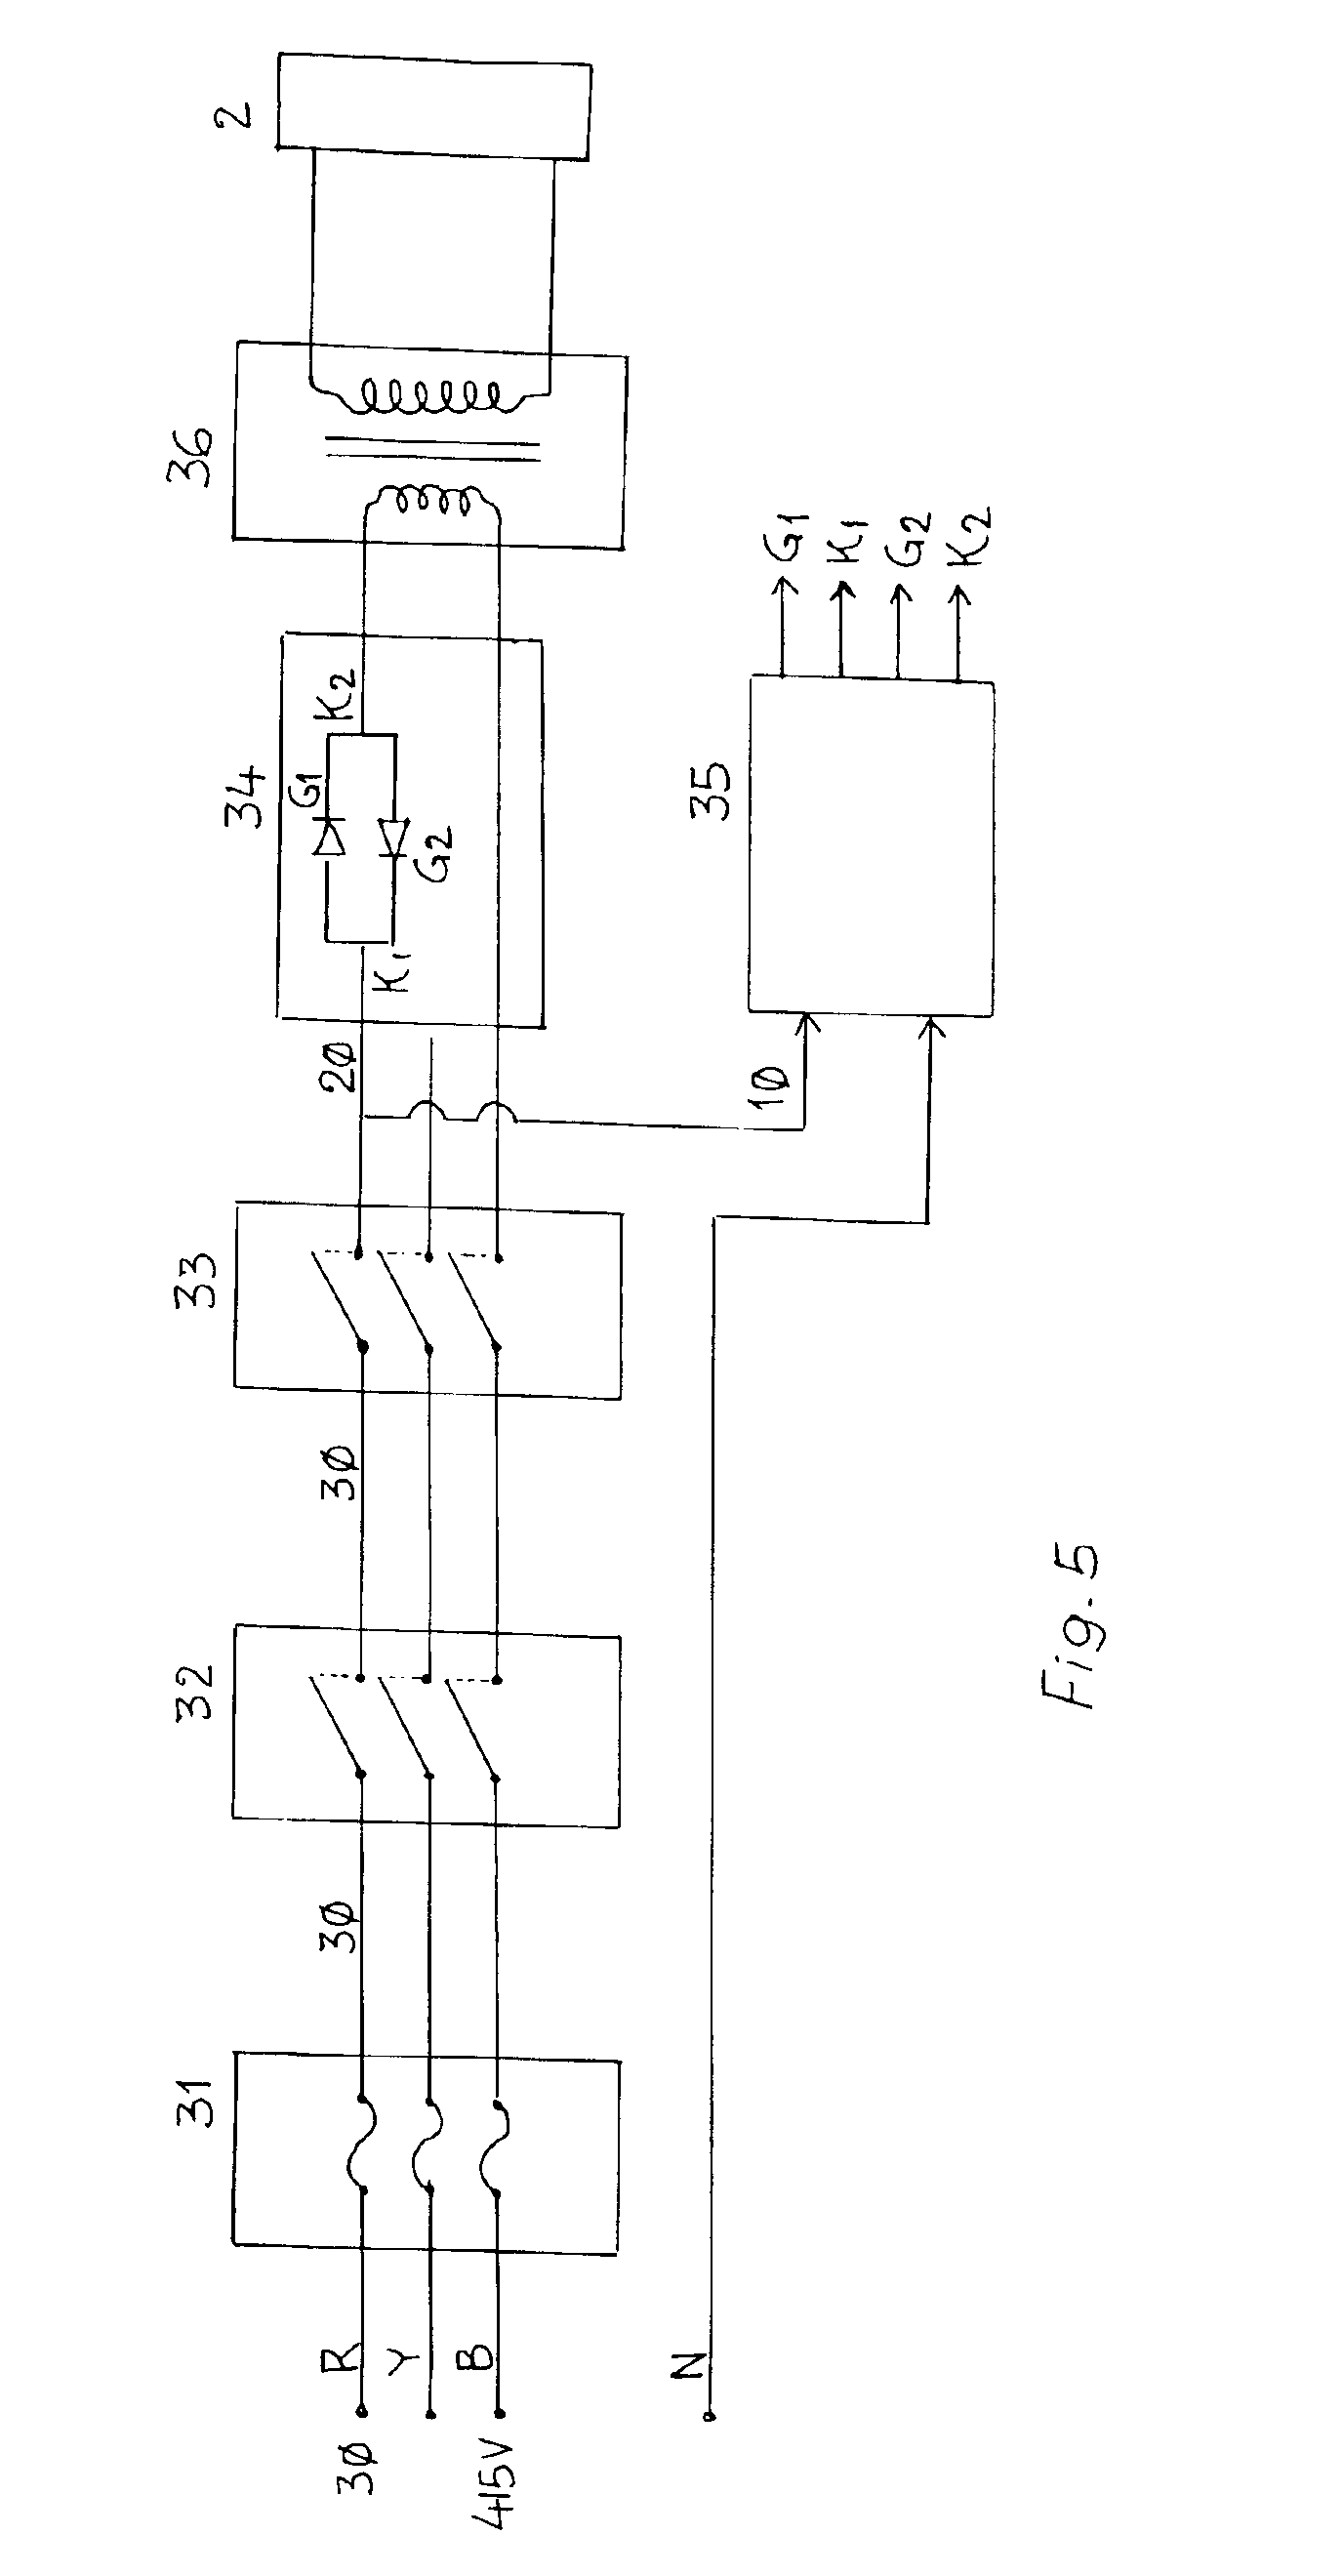 Process for forming coatings on metallic bodies and an apparatus for carrying out the process